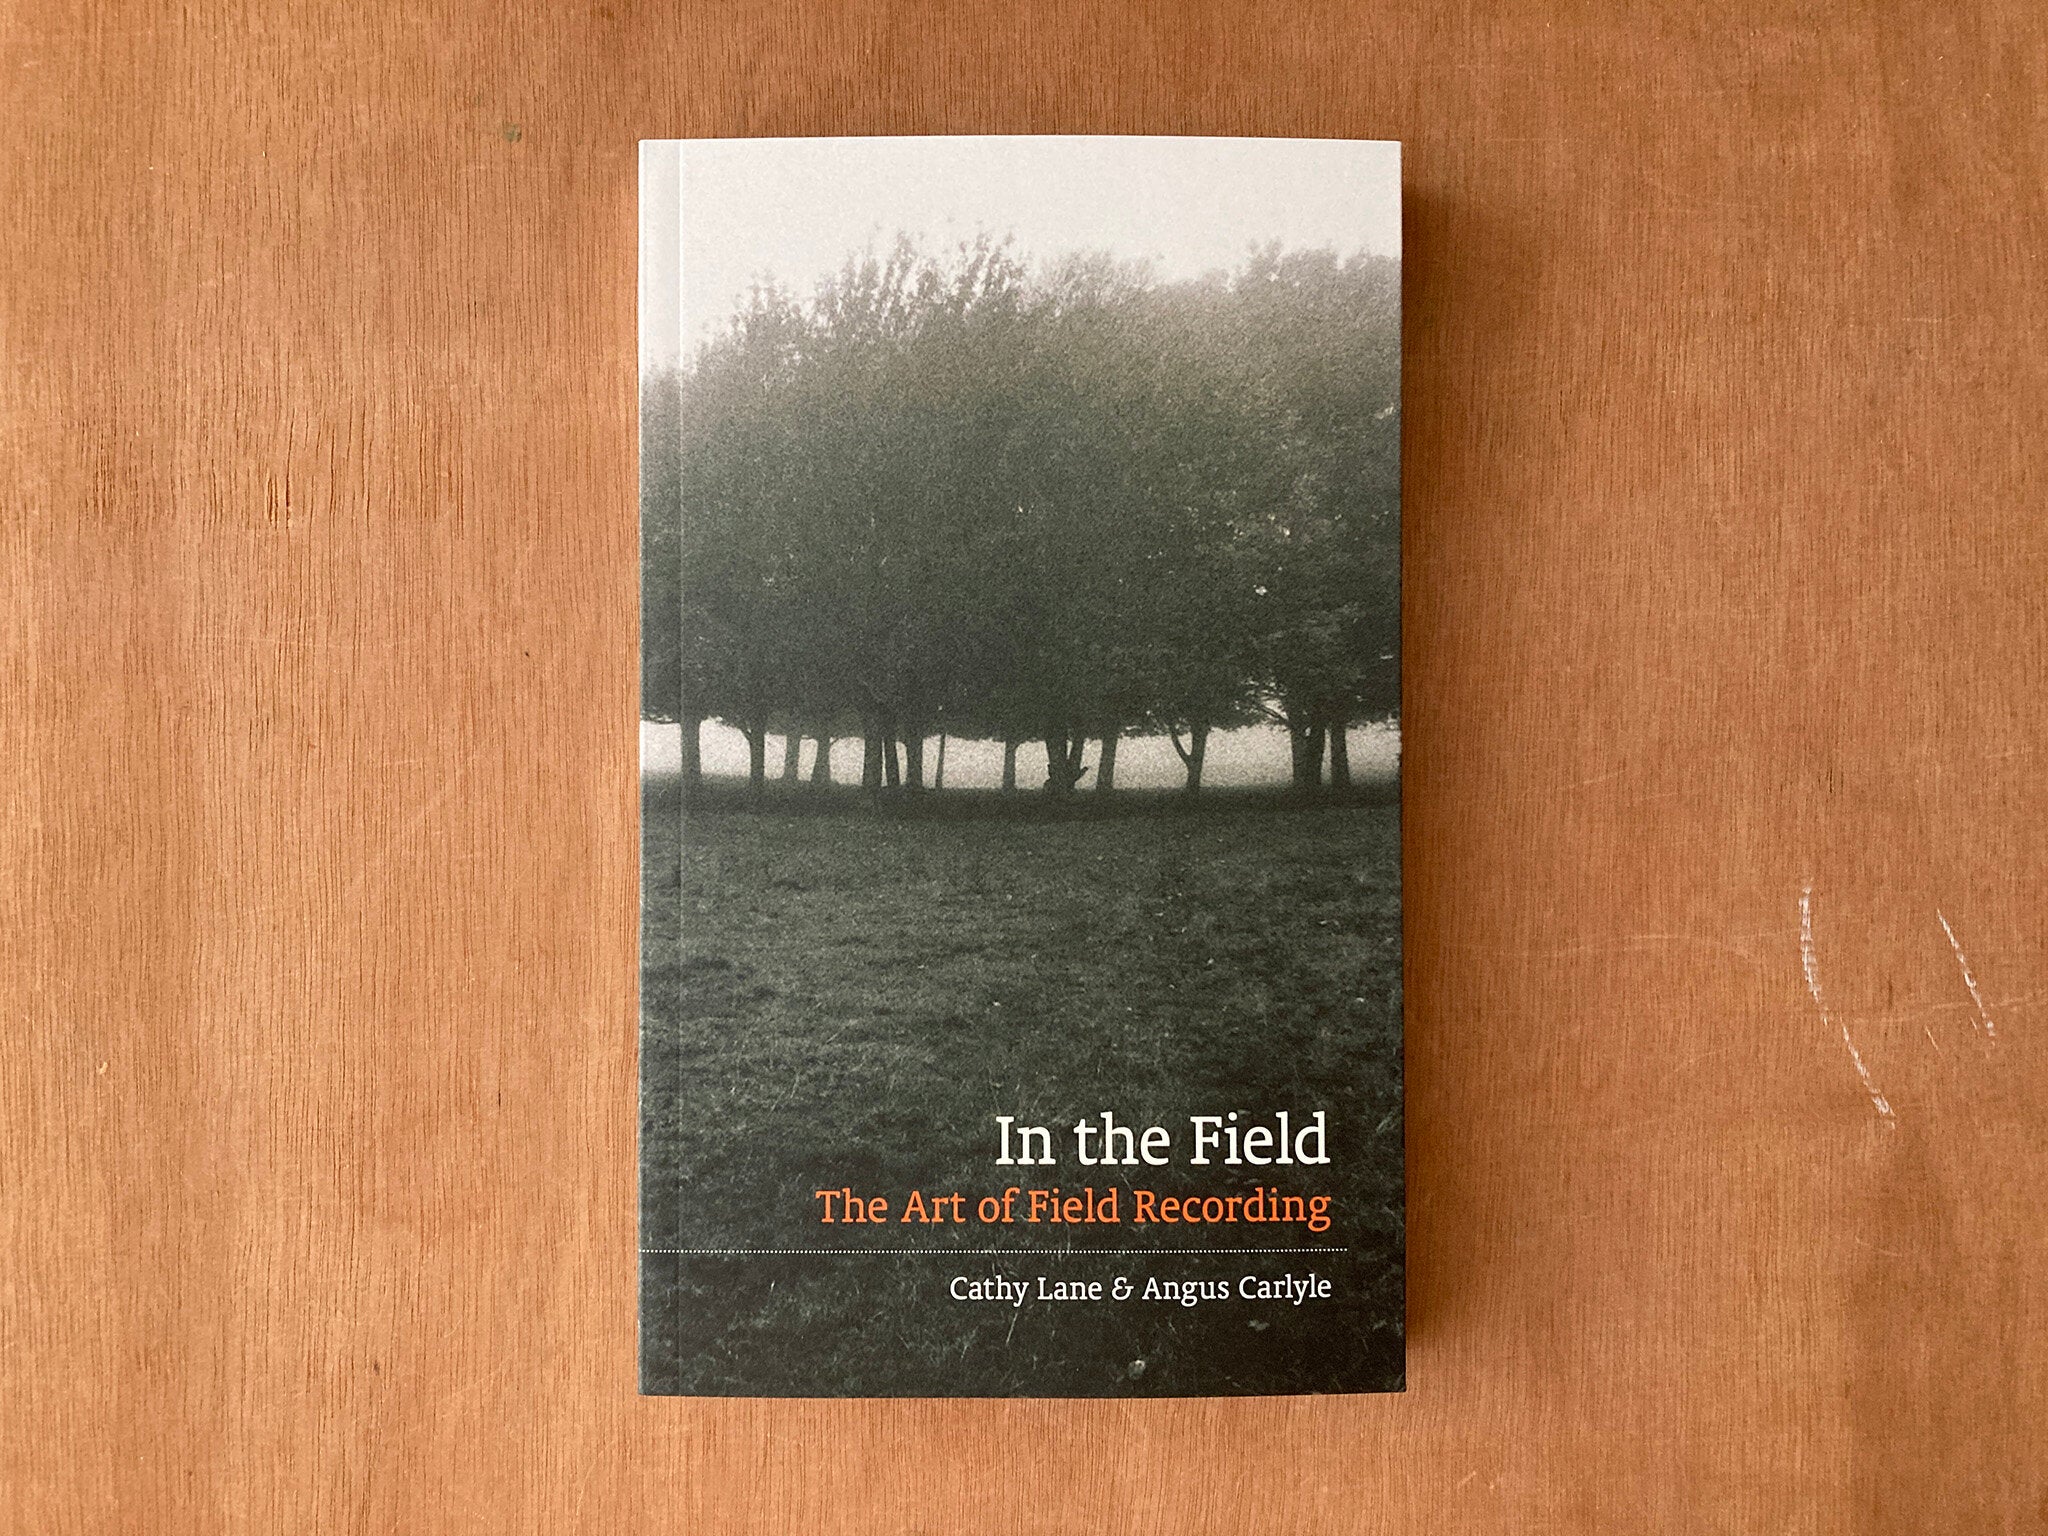 IN THE FIELD: THE ART OF FIELD RECORDING by Cathy Lane and Angus Carlyle